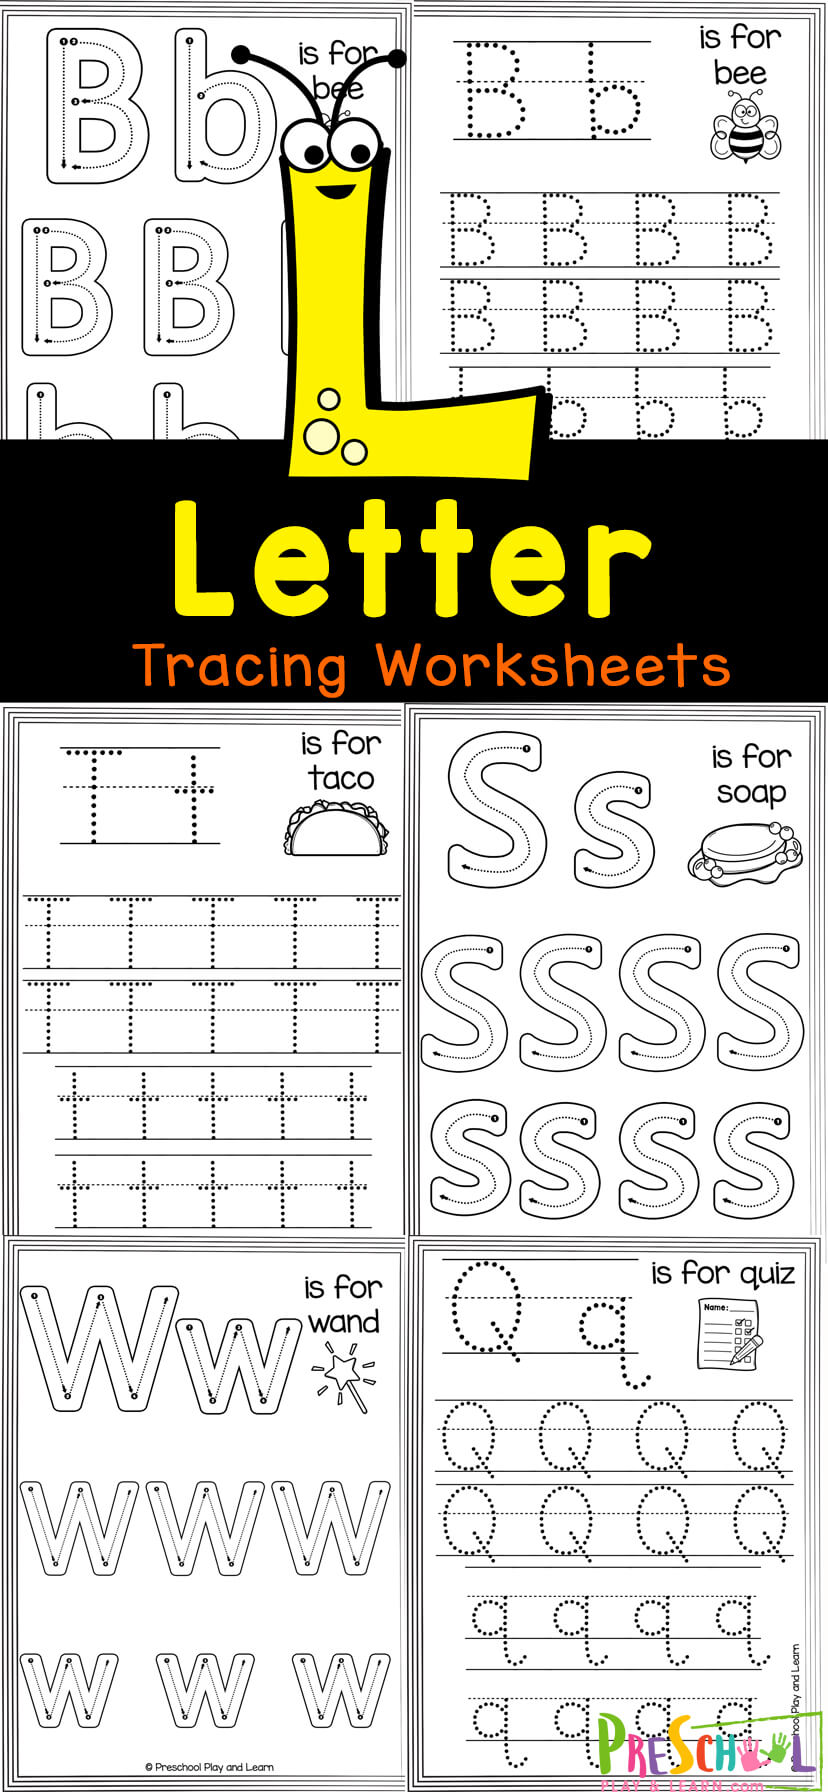 42-educative-letter-tracing-worksheets-kitty-baby-love-preschool